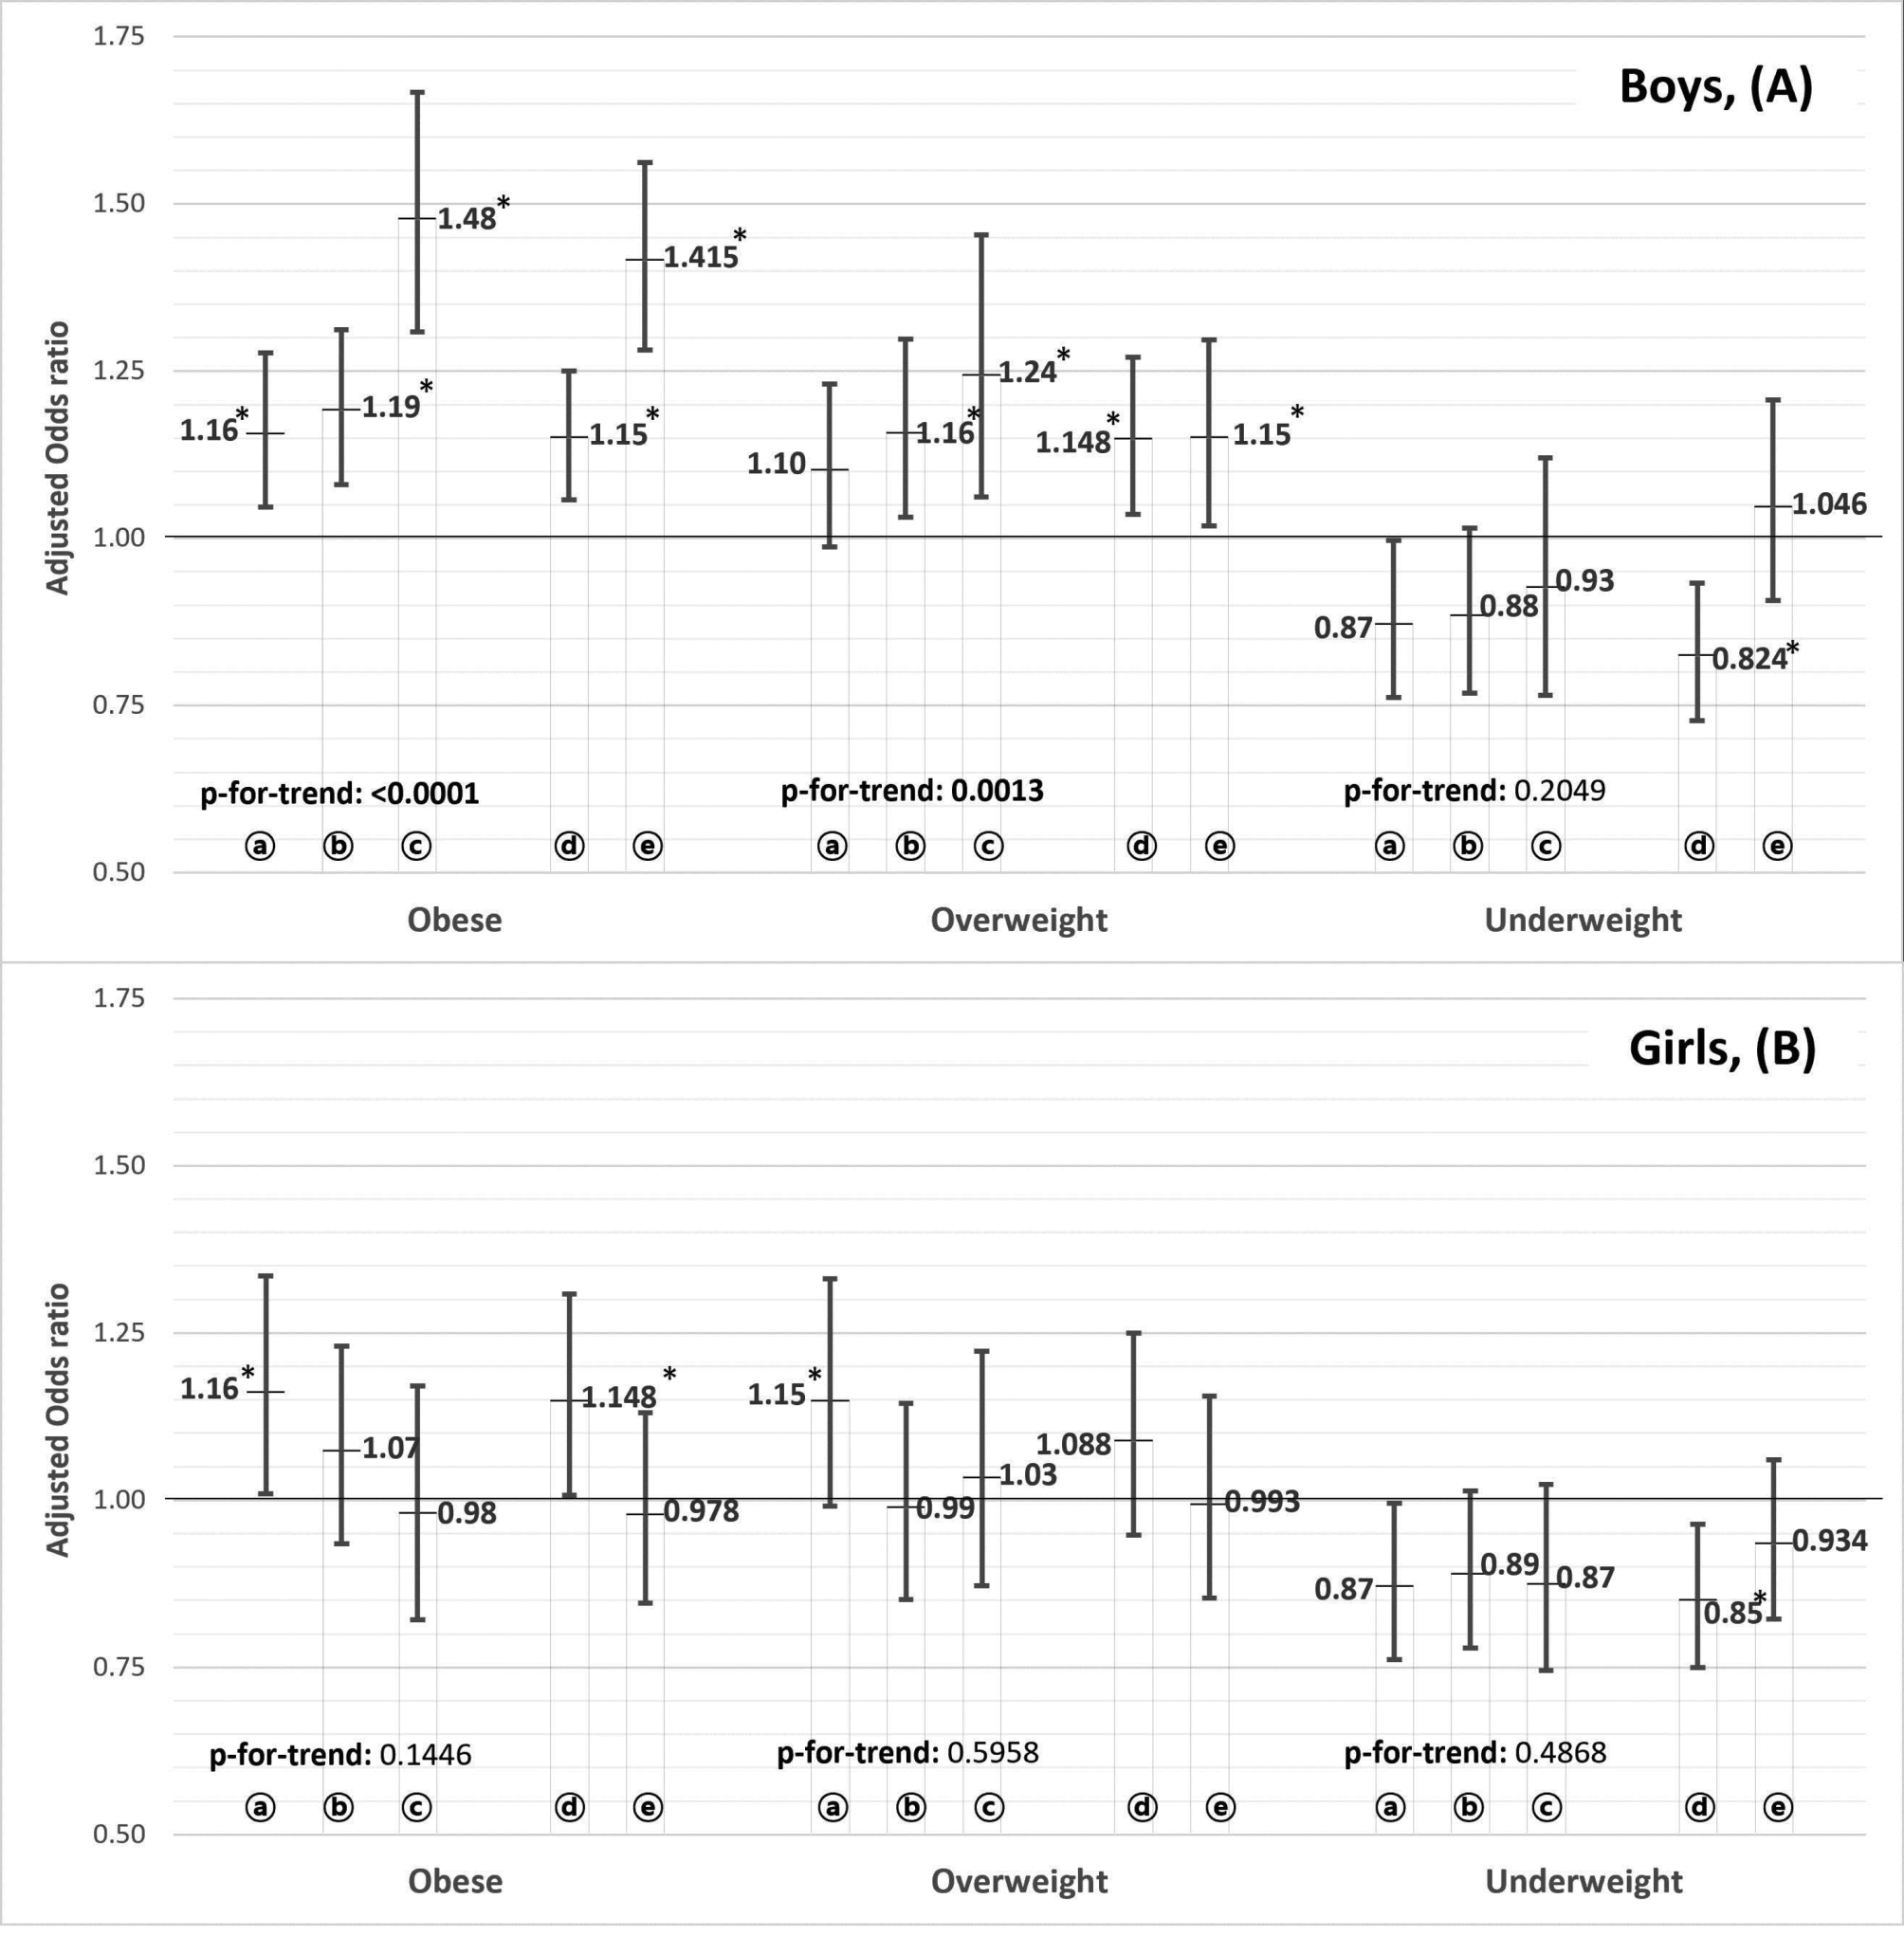 Association between watching eating broadcast “Mukbang and Cookbang” and body mass index status in South Korean adolescents stratified by gender